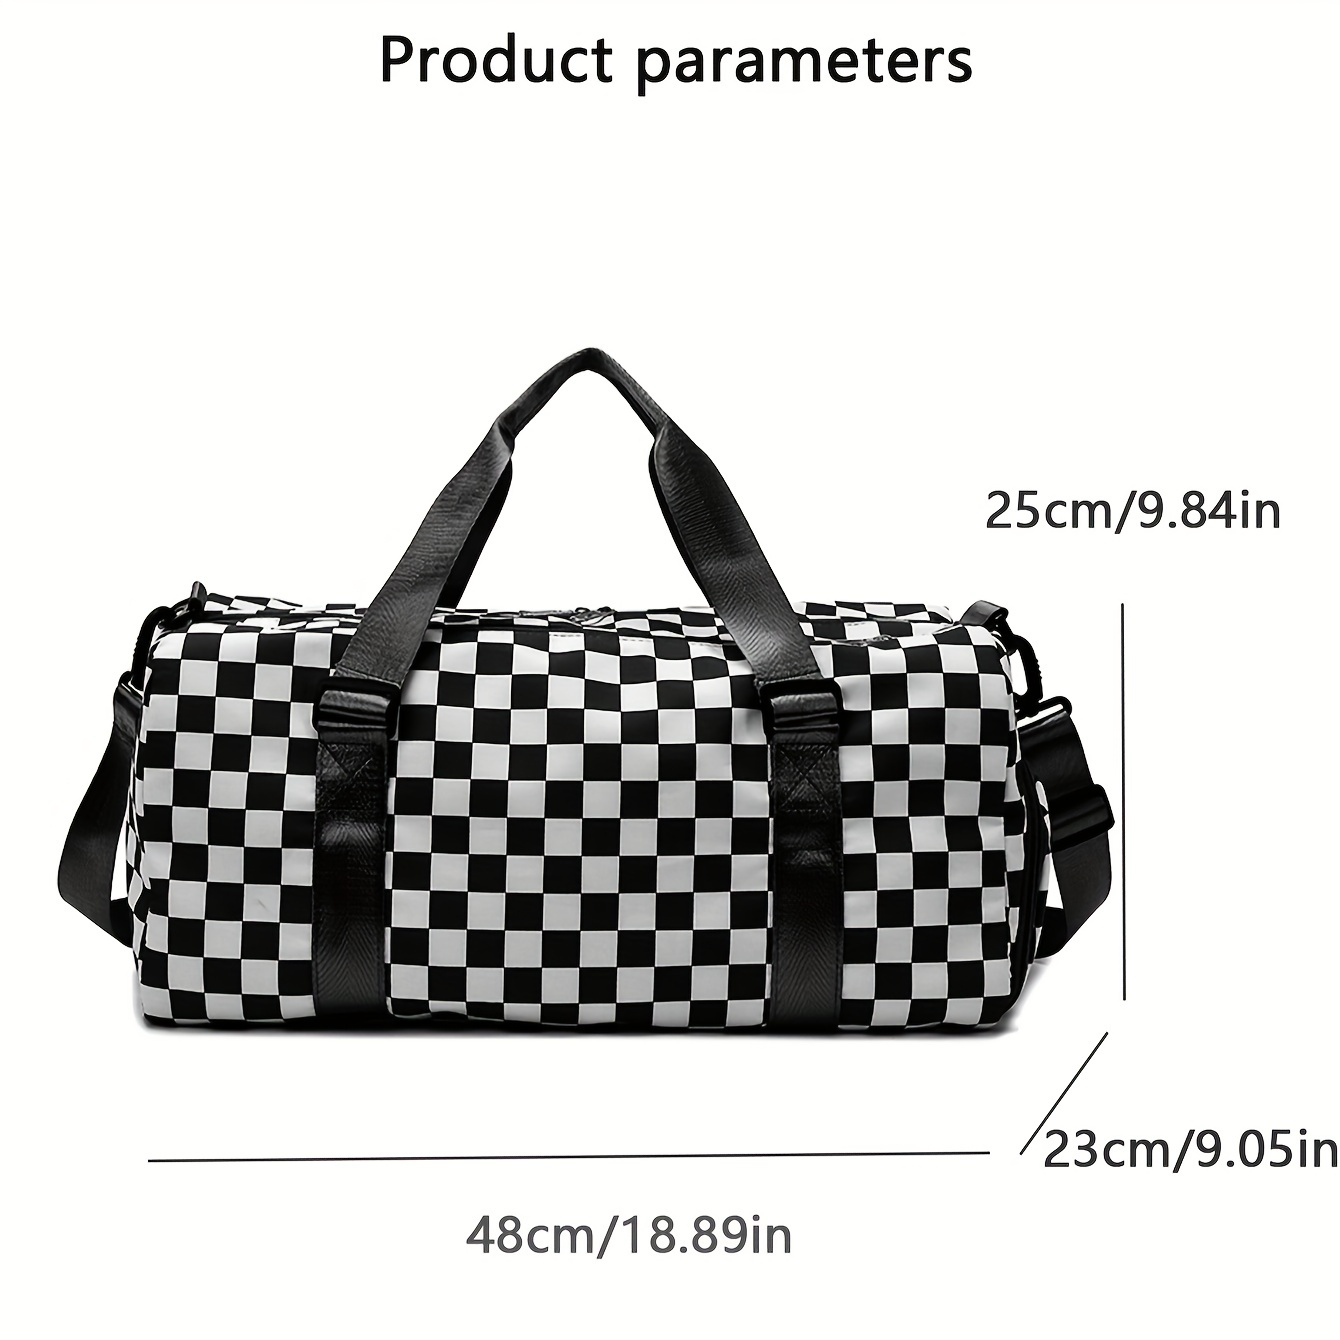 Twenty Four 21 inchTravel Duffel Bag Checkered Bag Weekend Overnight Luggage Shoulder Bag for Men Women -Brown Checkered Mothers Day Gifts, Adult